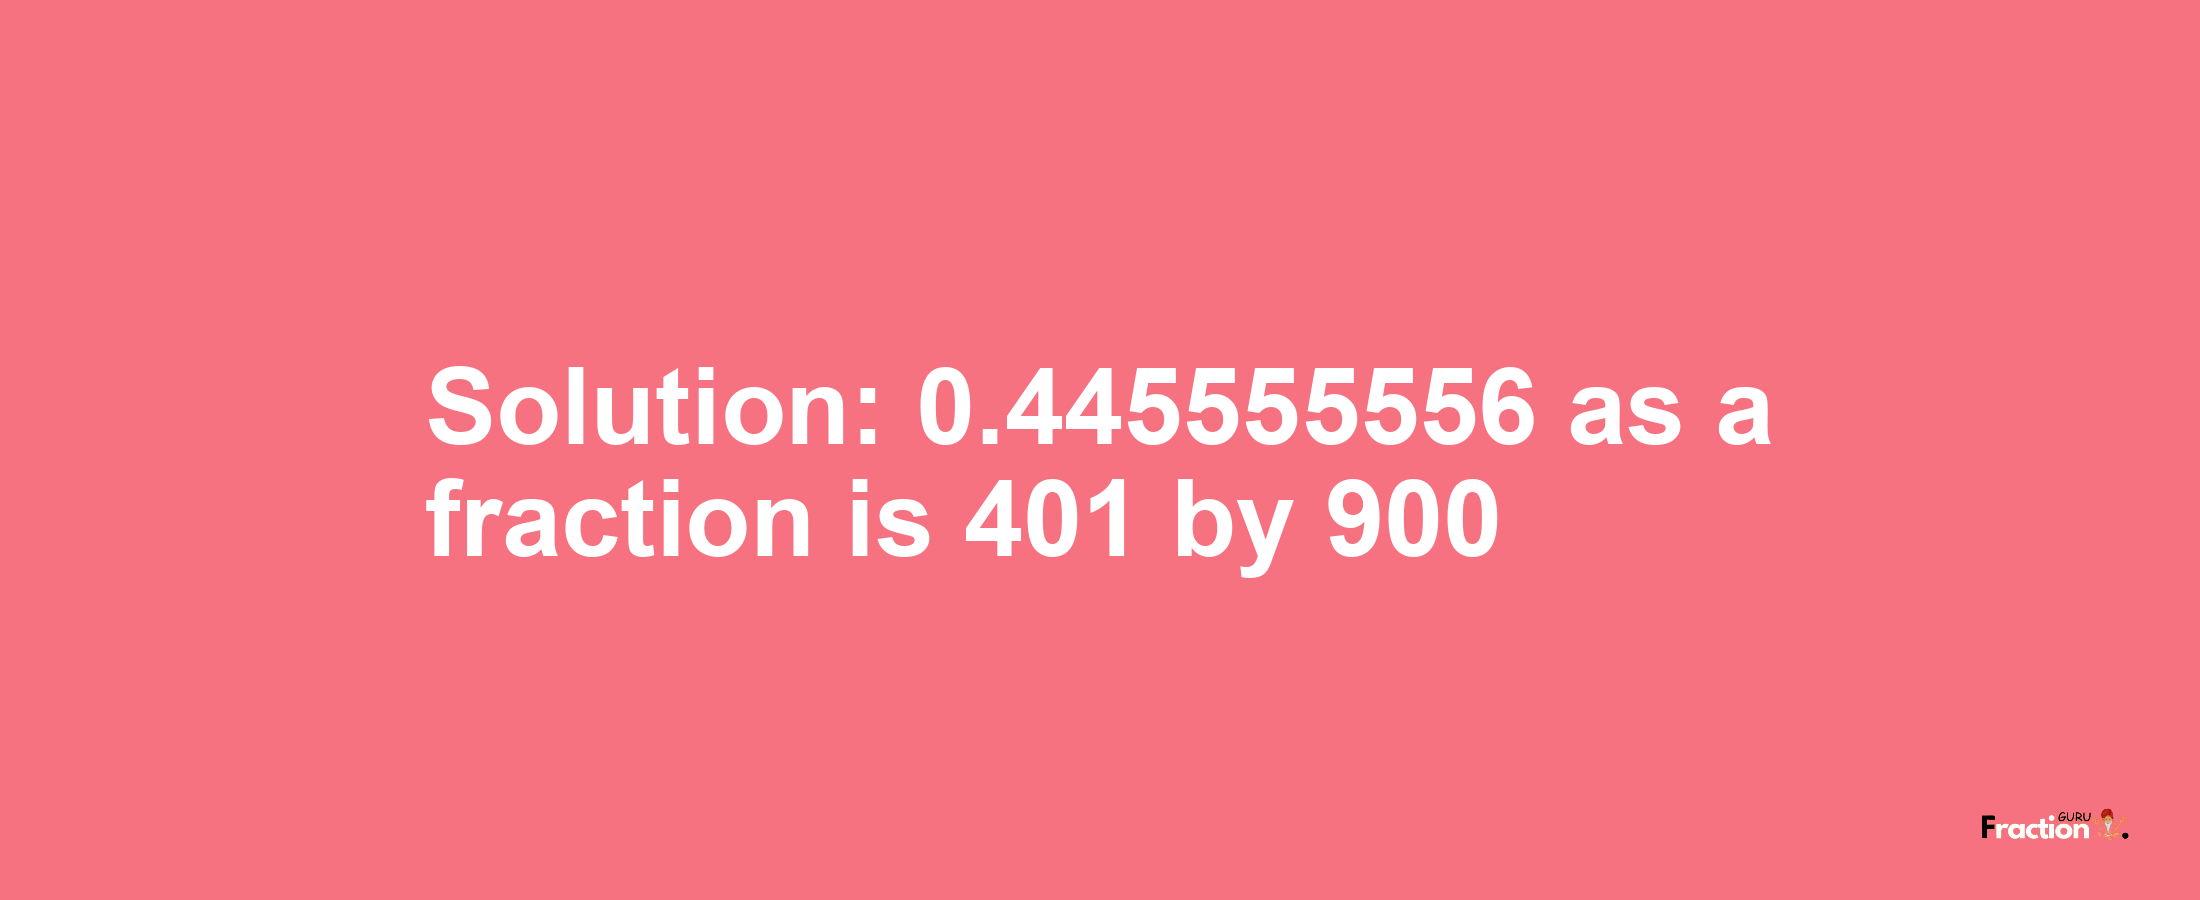 Solution:0.445555556 as a fraction is 401/900